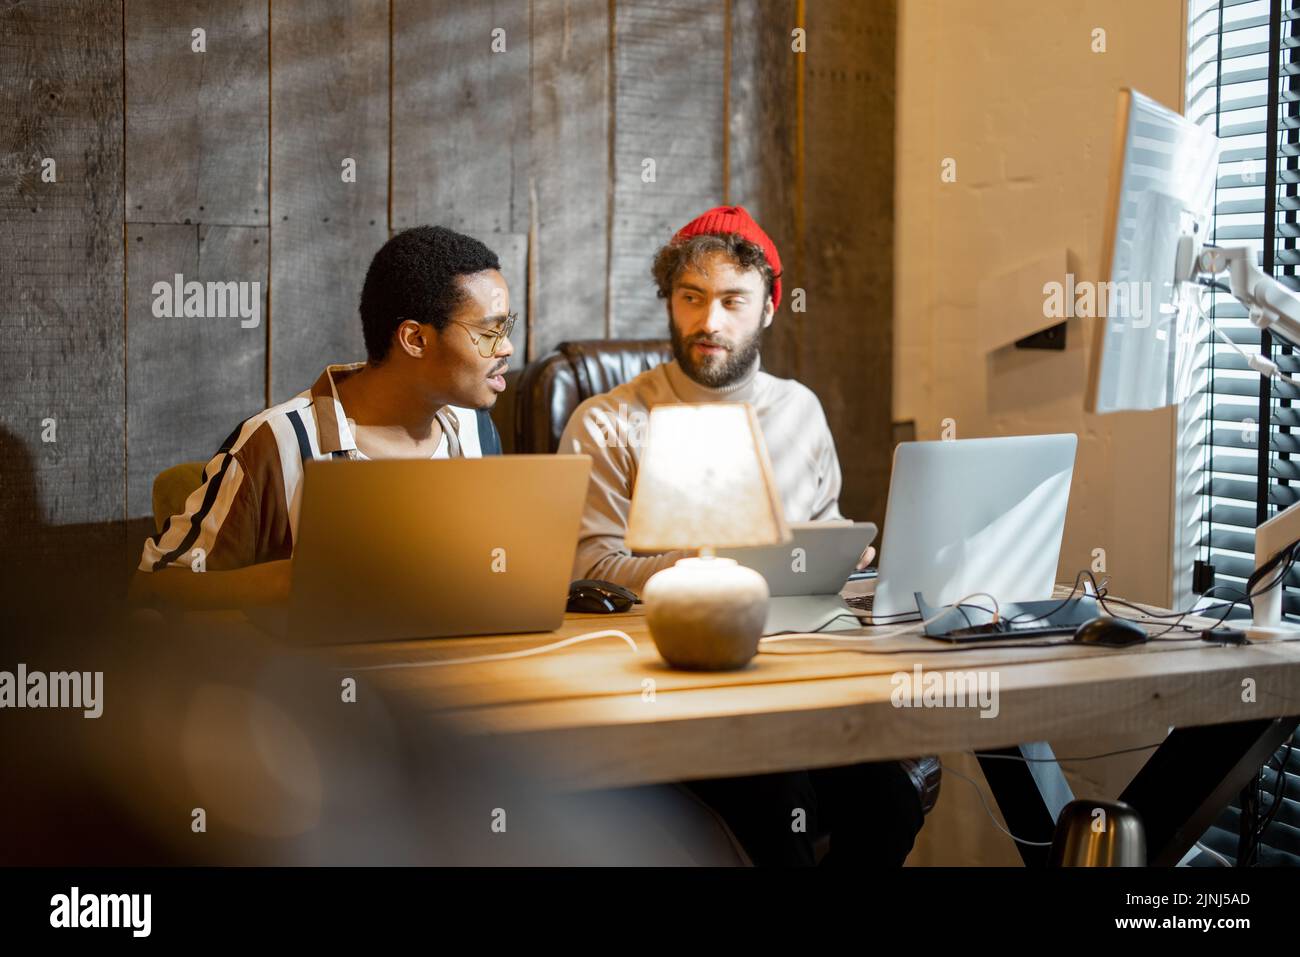 Two men with different nationality working on computers, sitting together at cozy home office. Concept of freelance and remote work. Stylish male hips Stock Photo